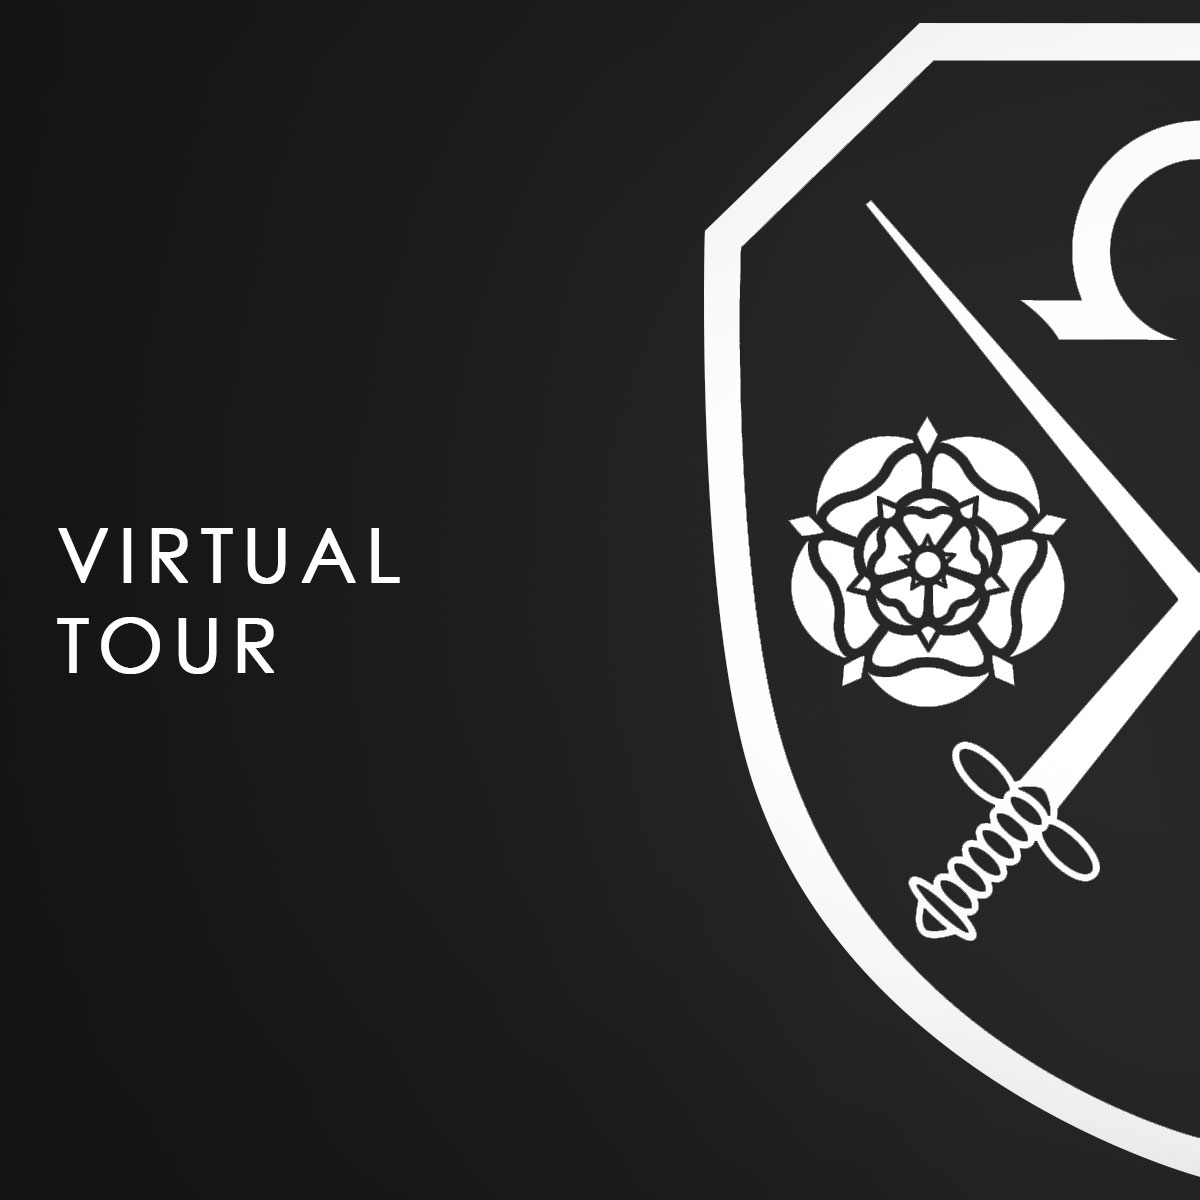 A black background with the East Barnet School logo which says Virtual Tour